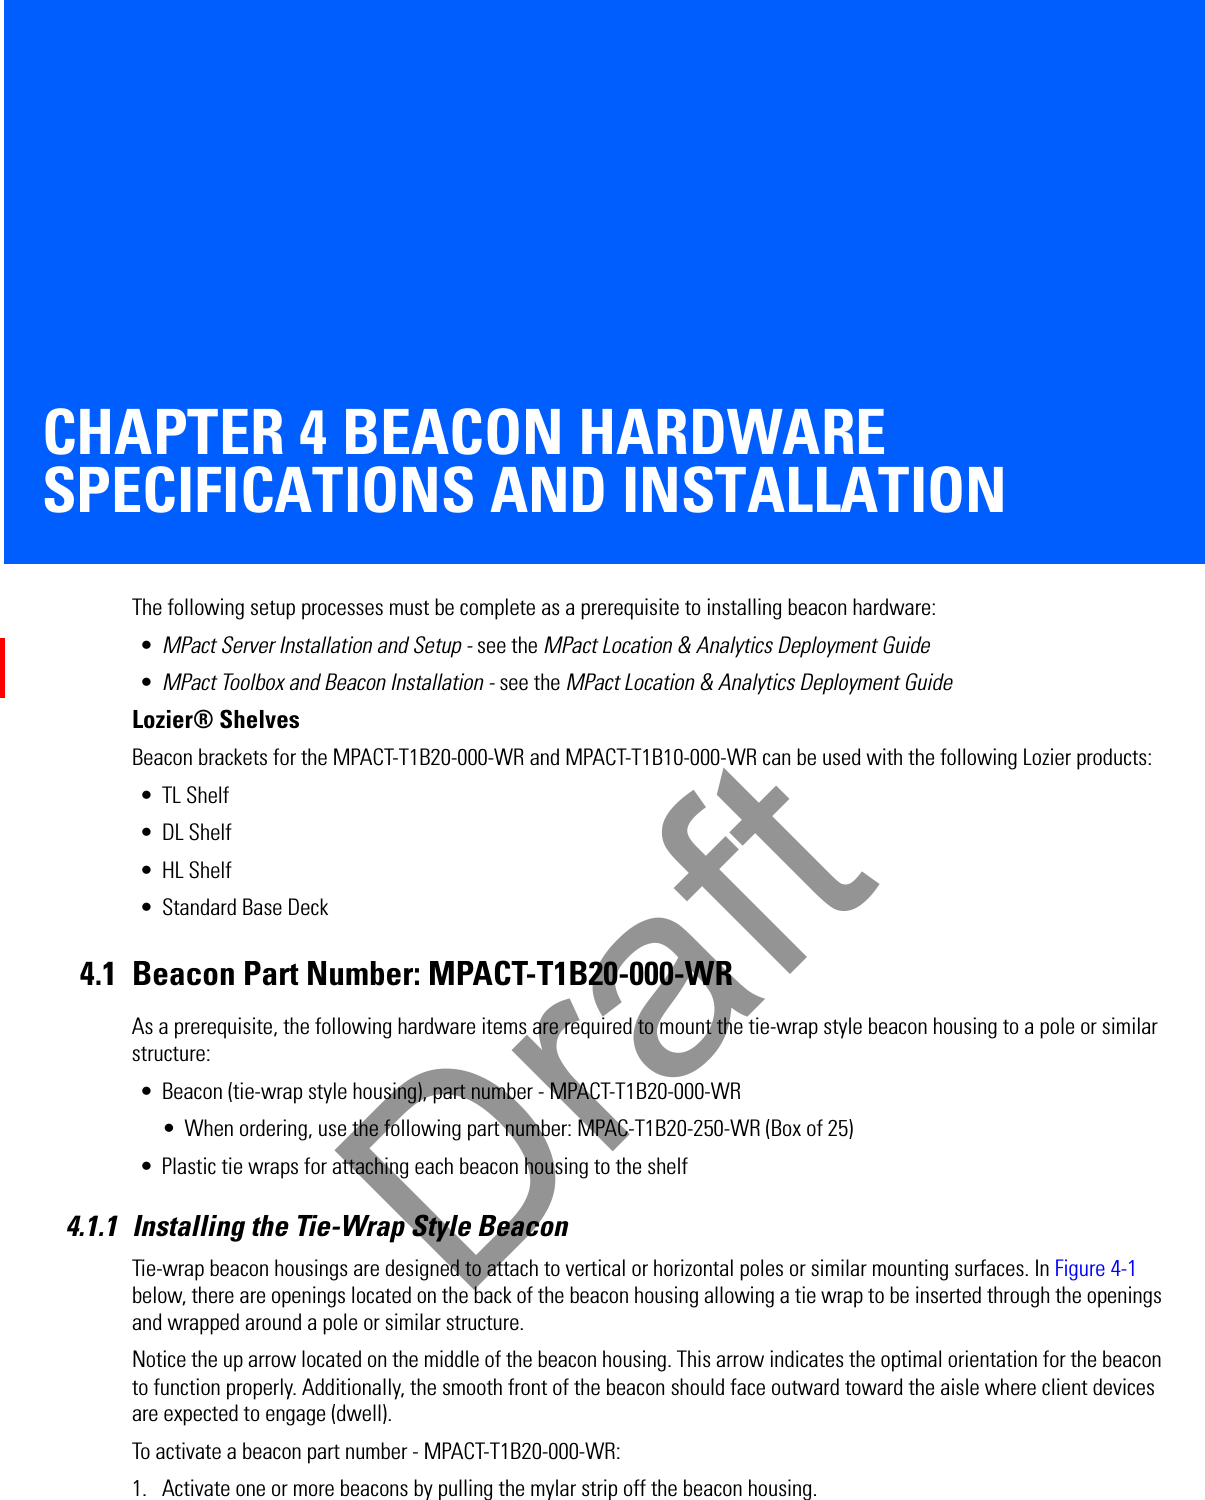 CHAPTER 4 BEACON HARDWARE SPECIFICATIONS AND INSTALLATIONThe following setup processes must be complete as a prerequisite to installing beacon hardware:•MPact Server Installation and Setup - see the MPact Location &amp; Analytics Deployment Guide•MPact Toolbox and Beacon Installation - see the MPact Location &amp; Analytics Deployment GuideLozier® ShelvesBeacon brackets for the MPACT-T1B20-000-WR and MPACT-T1B10-000-WR can be used with the following Lozier products:• TL Shelf•DL Shelf•HL Shelf• Standard Base Deck4.1 Beacon Part Number: MPACT-T1B20-000-WRAs a prerequisite, the following hardware items are required to mount the tie-wrap style beacon housing to a pole or similar structure:• Beacon (tie-wrap style housing), part number - MPACT-T1B20-000-WR• When ordering, use the following part number: MPAC-T1B20-250-WR (Box of 25)• Plastic tie wraps for attaching each beacon housing to the shelf4.1.1 Installing the Tie-Wrap Style BeaconTie-wrap beacon housings are designed to attach to vertical or horizontal poles or similar mounting surfaces. In Figure 4-1 below, there are openings located on the back of the beacon housing allowing a tie wrap to be inserted through the openings and wrapped around a pole or similar structure. Notice the up arrow located on the middle of the beacon housing. This arrow indicates the optimal orientation for the beacon to function properly. Additionally, the smooth front of the beacon should face outward toward the aisle where client devices are expected to engage (dwell). To activate a beacon part number - MPACT-T1B20-000-WR: 1. Activate one or more beacons by pulling the mylar strip off the beacon housing. Draft